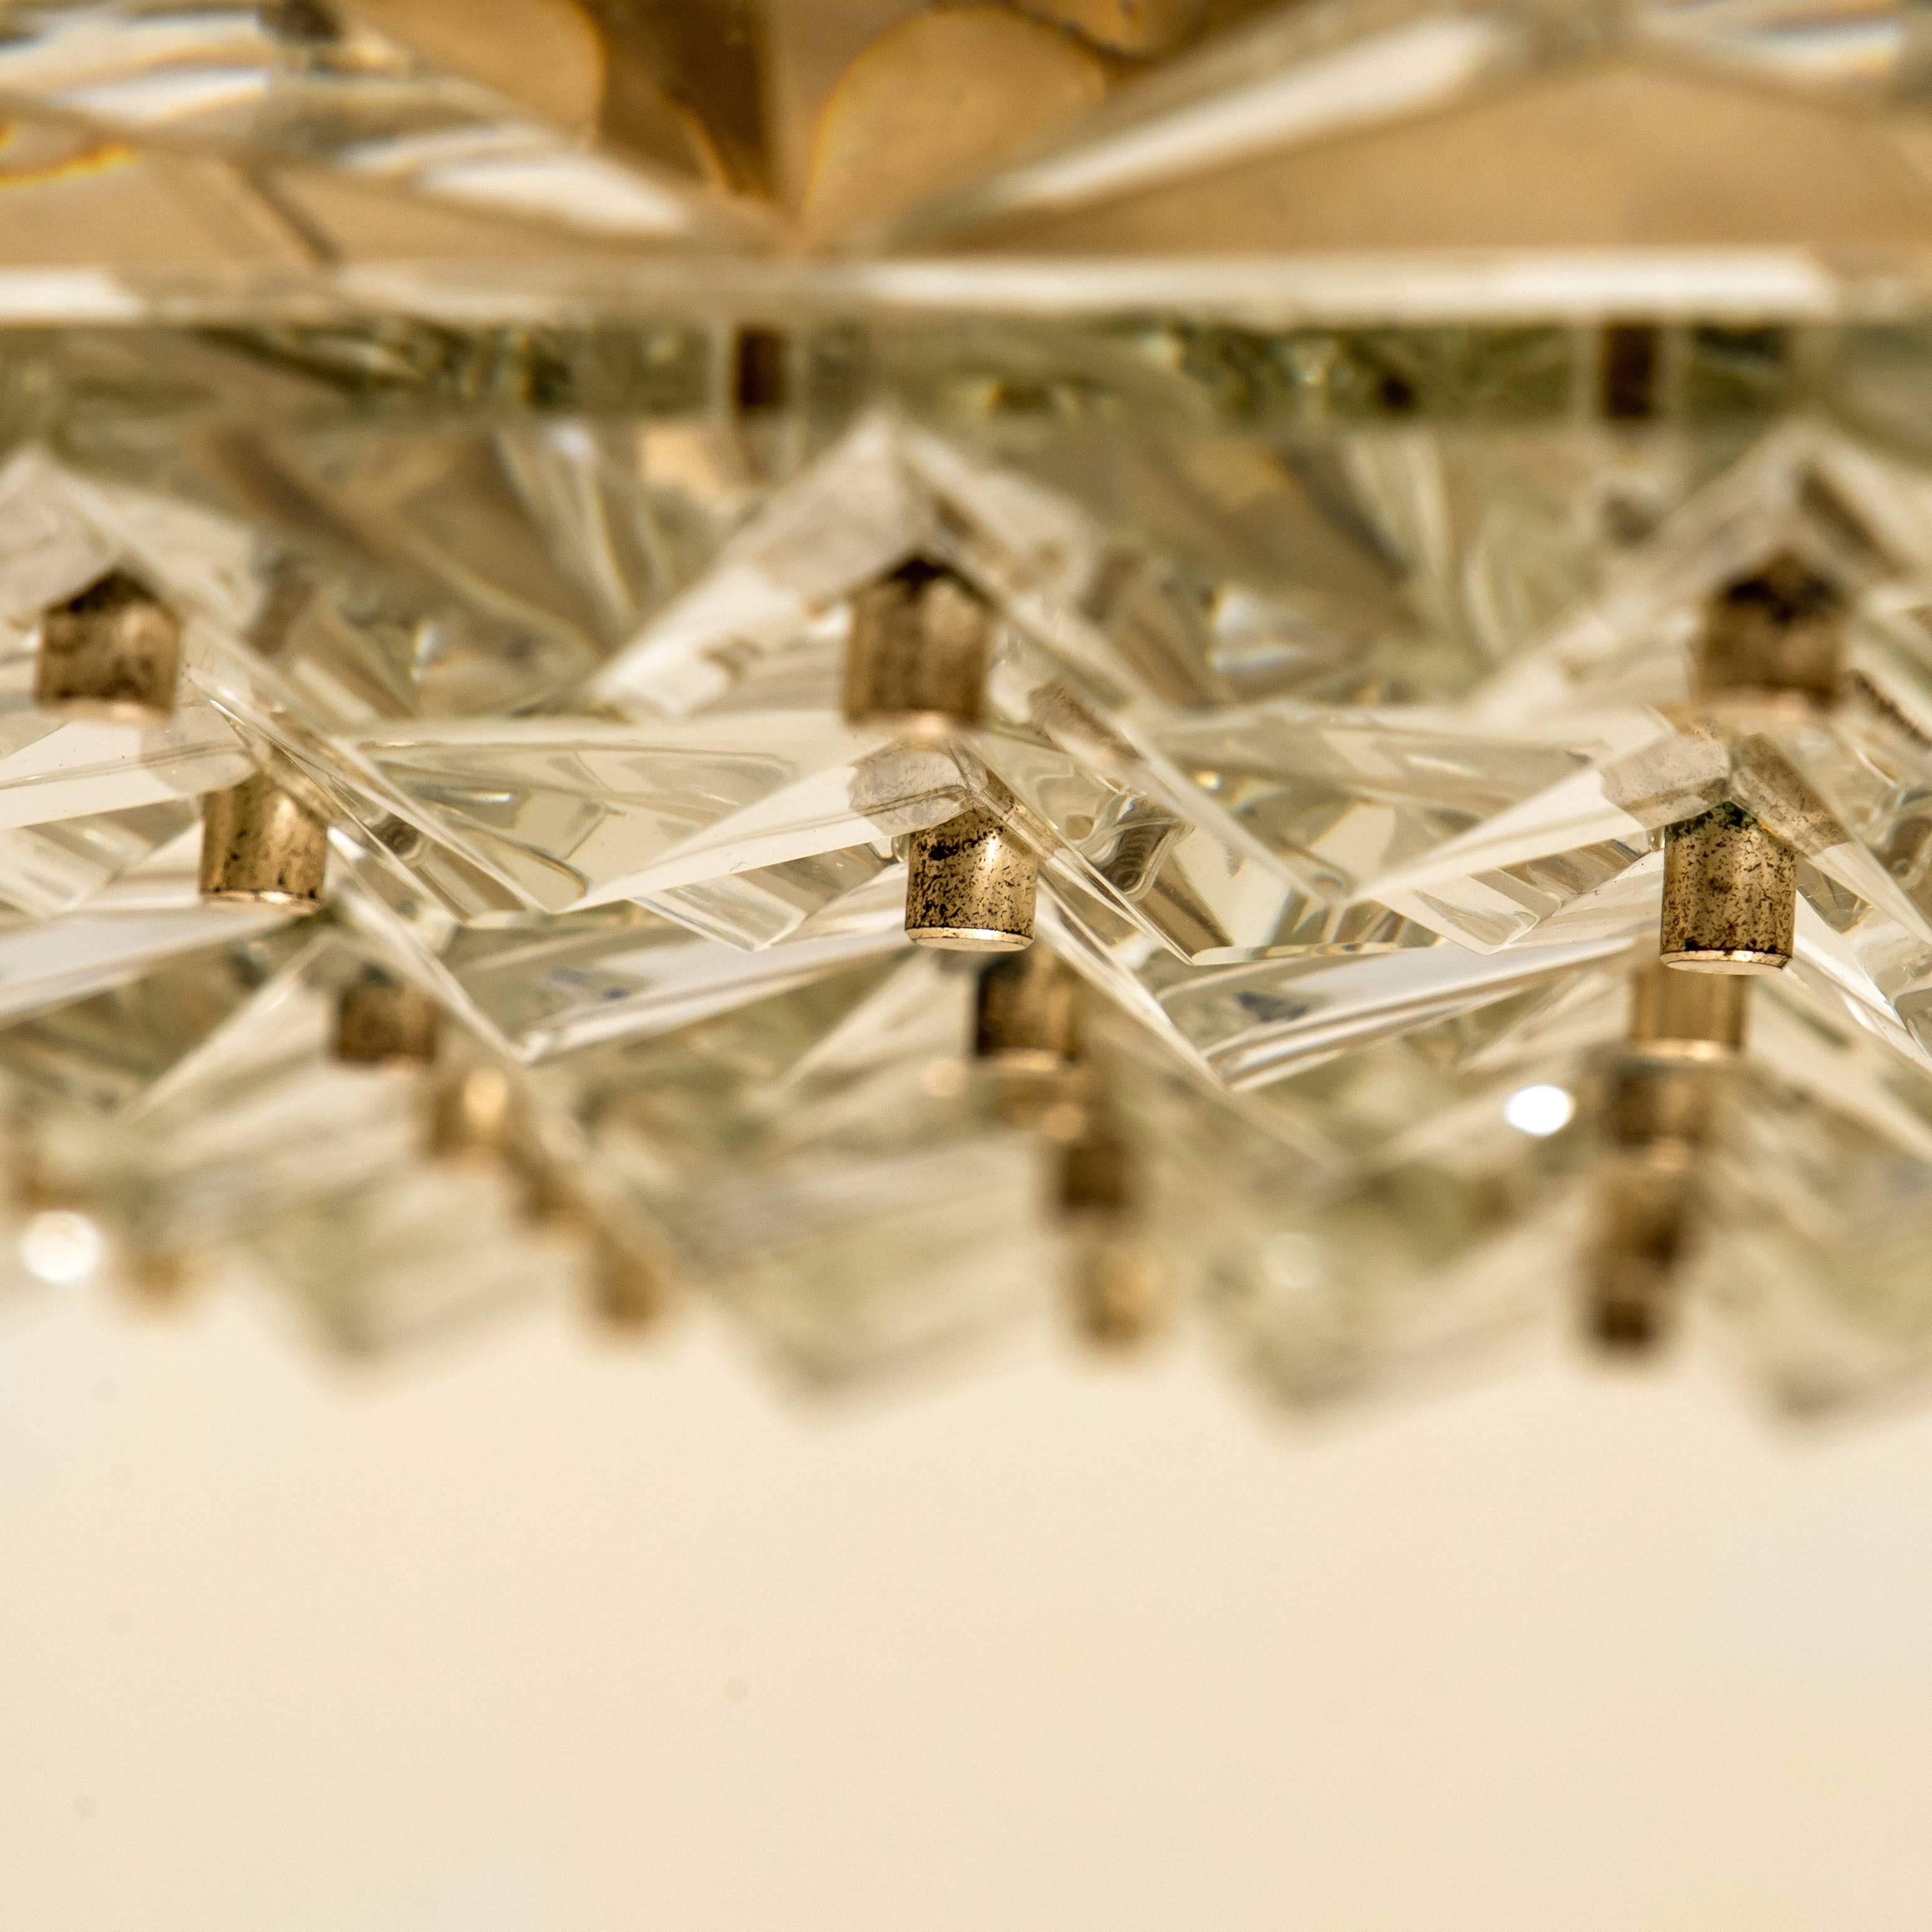 This unique modernist design chandelier was designed by the Kalmar during the 1960s, and manufactured in Austria. The unique rectangular crystals are meticulously cut in such a way that radiate the light of the bulbs in different directions. We can